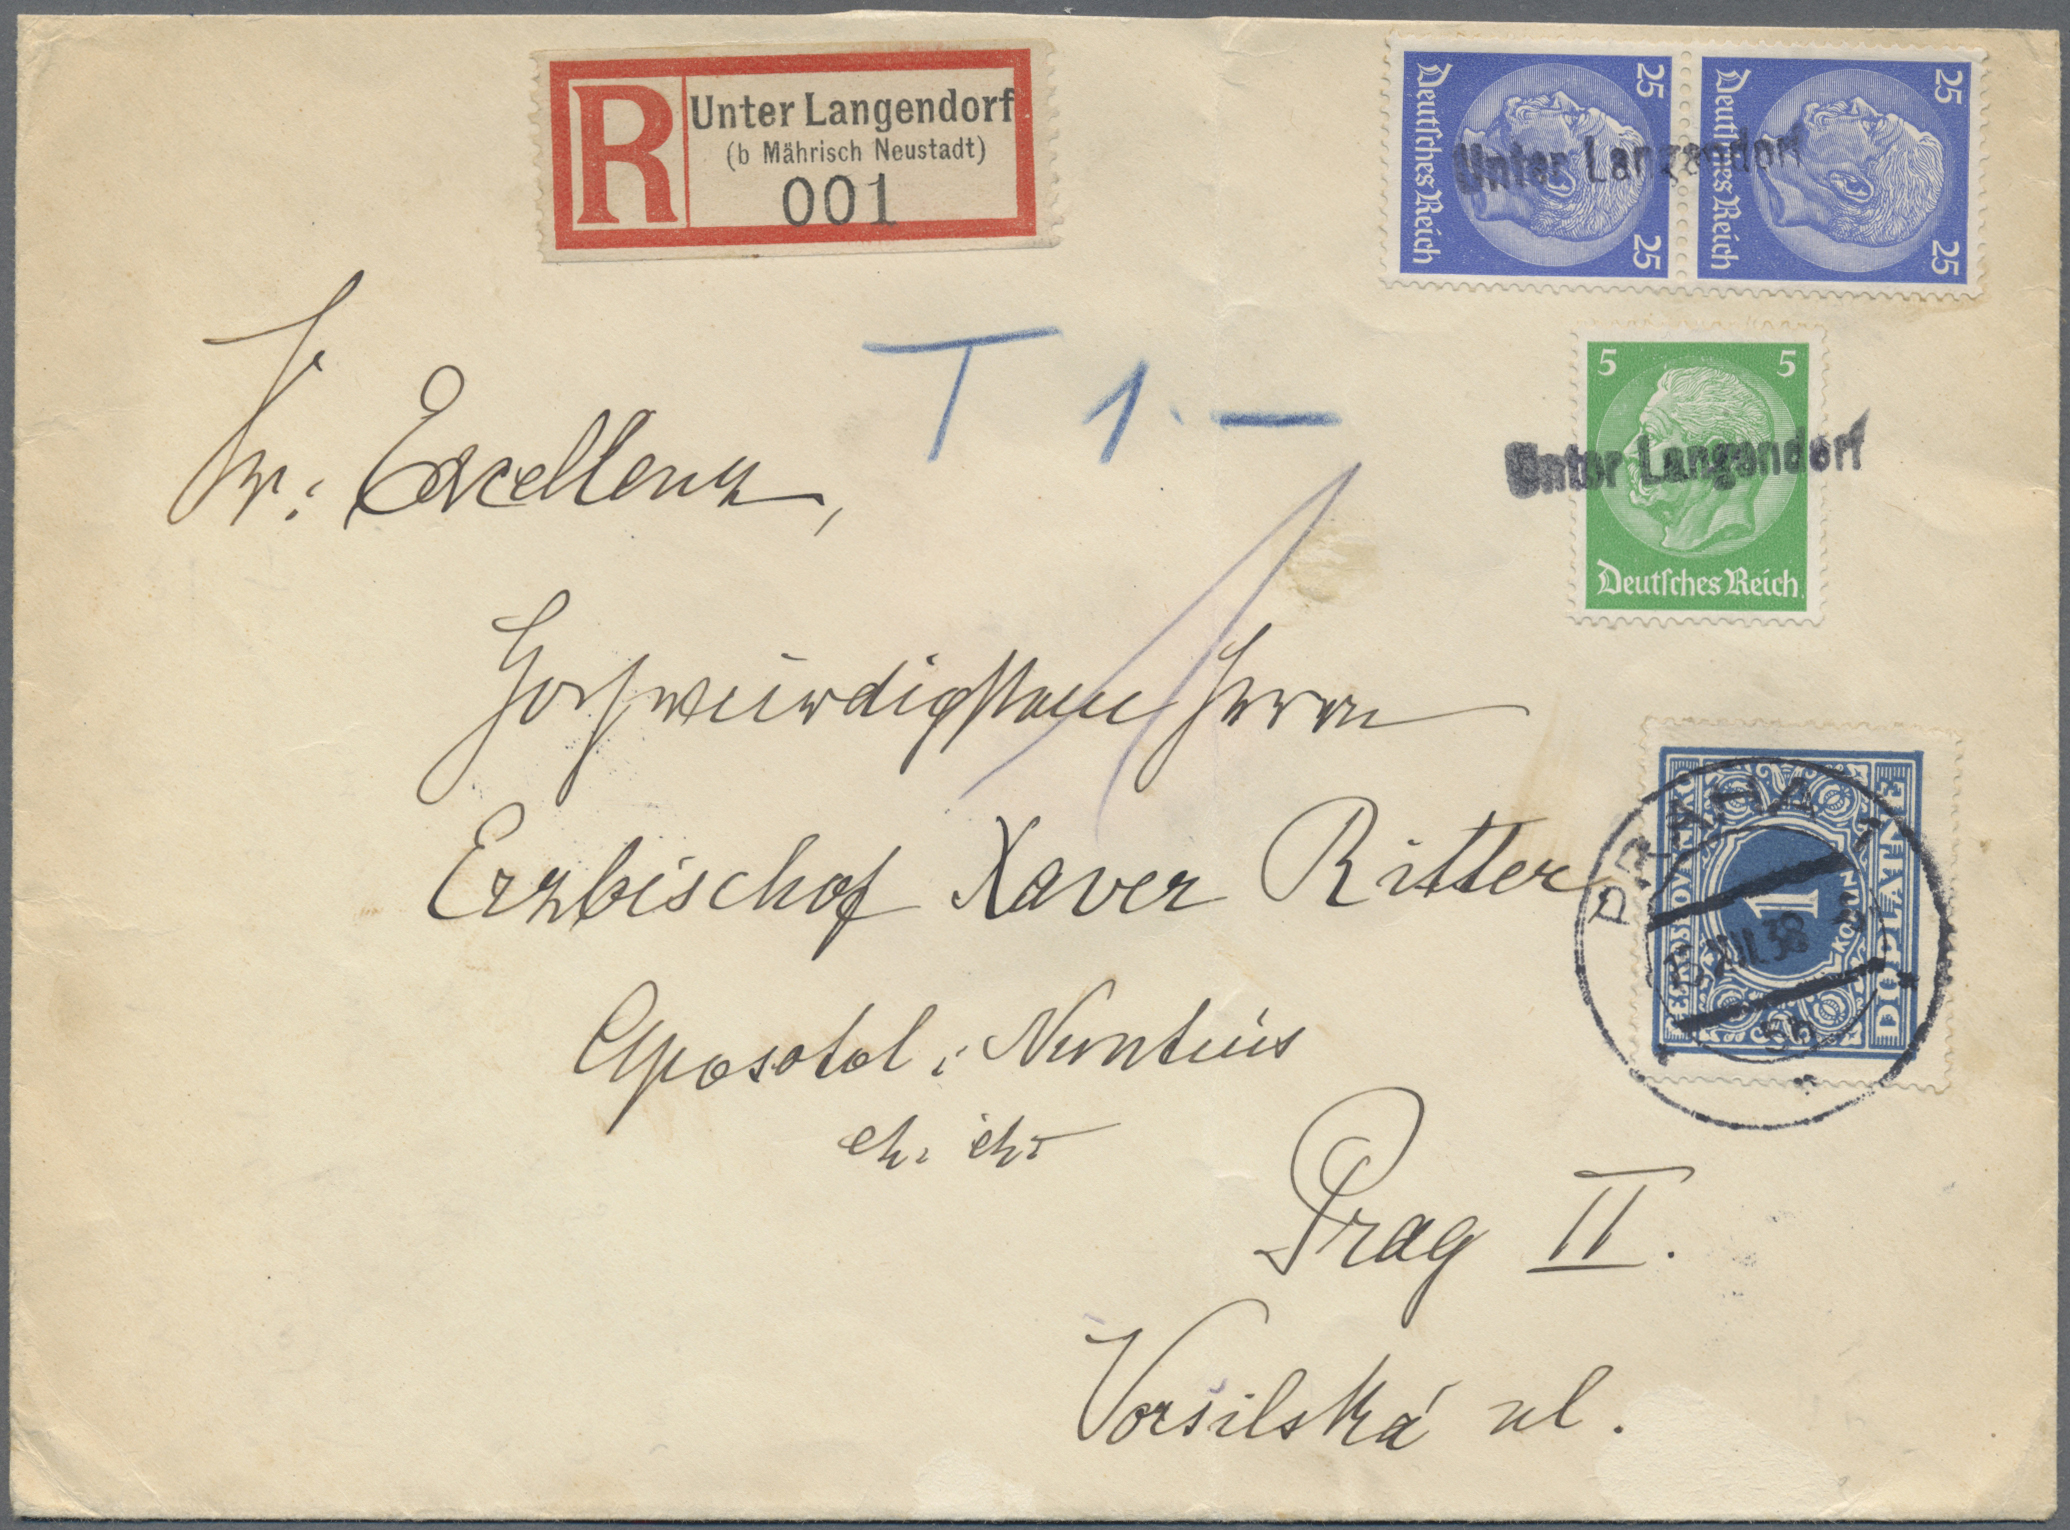 Lot 23704 - sudetenland  -  Auktionshaus Christoph Gärtner GmbH & Co. KG 50th Auction Anniversary Auction - Day 7